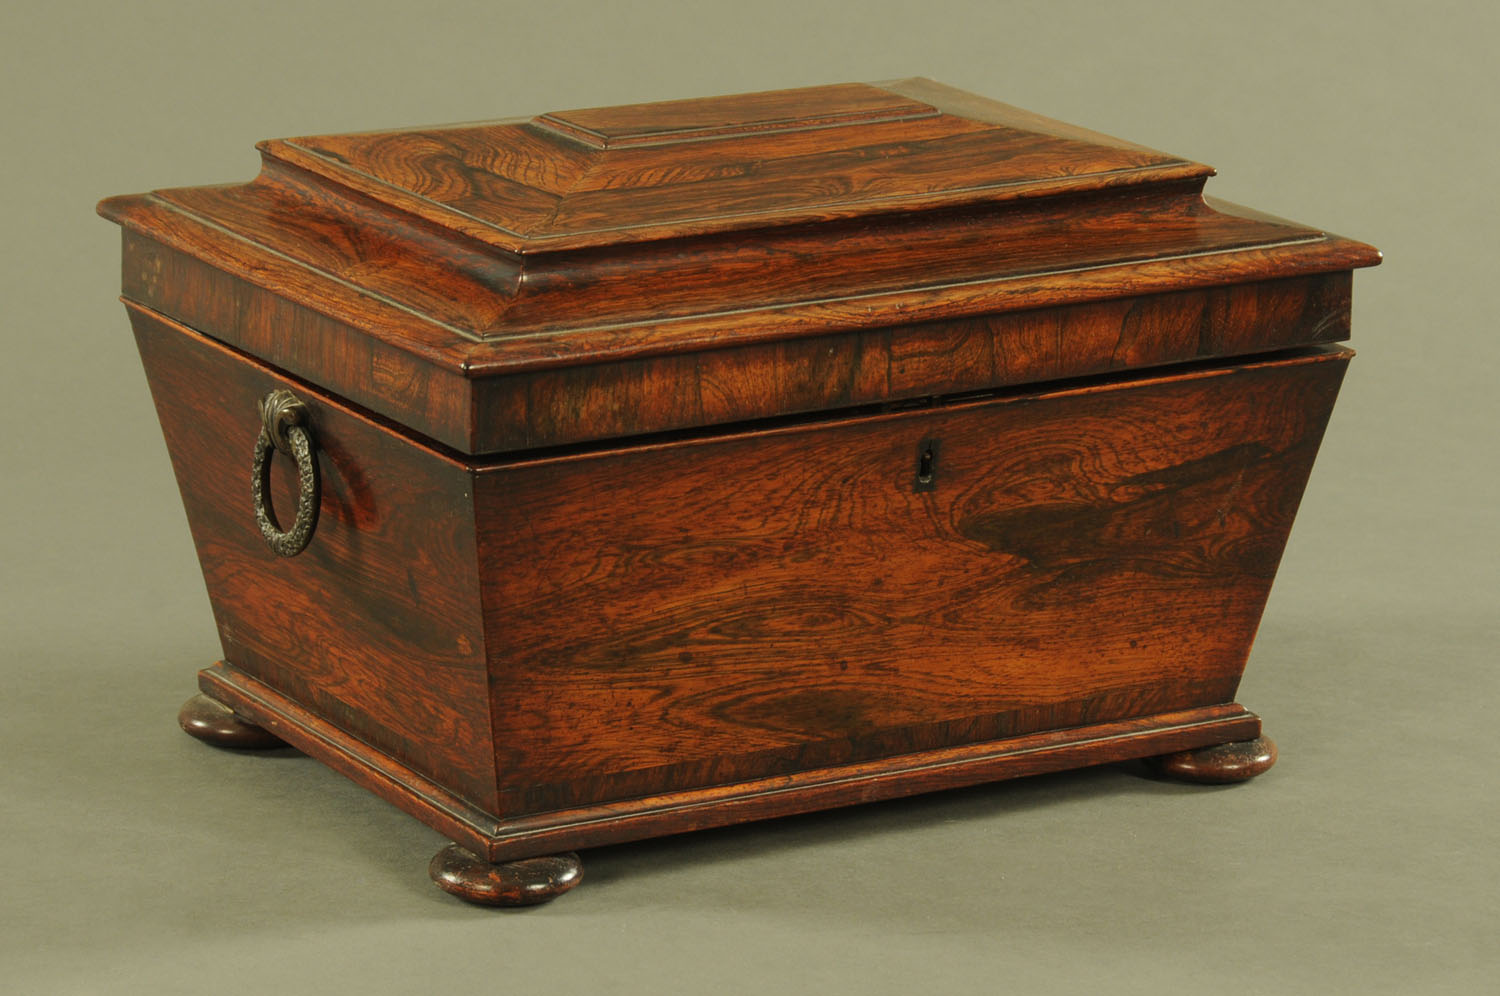 A Regency rosewood table box, with bronze handles, sarcophagus form with interior fitted for sewing.